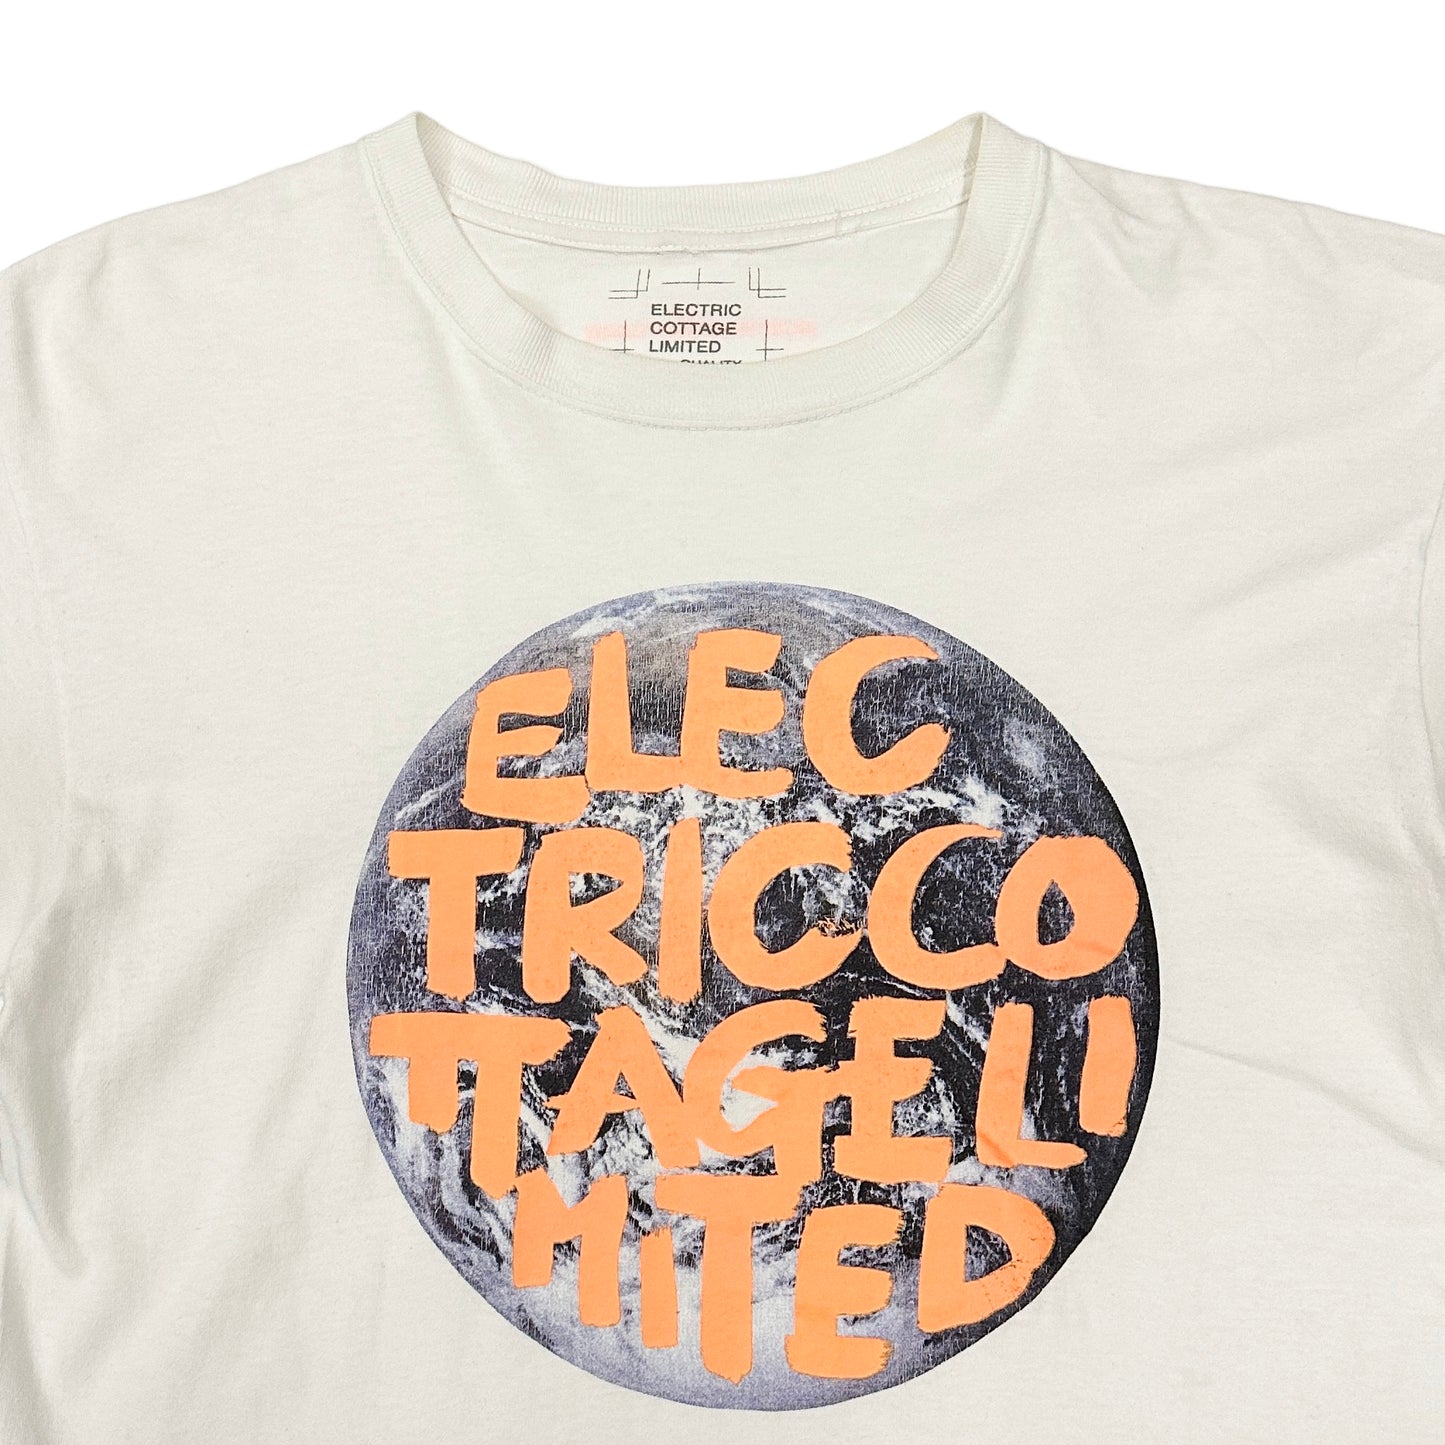 ELECTRIC COTTAGE / EARTH T-SHIRT